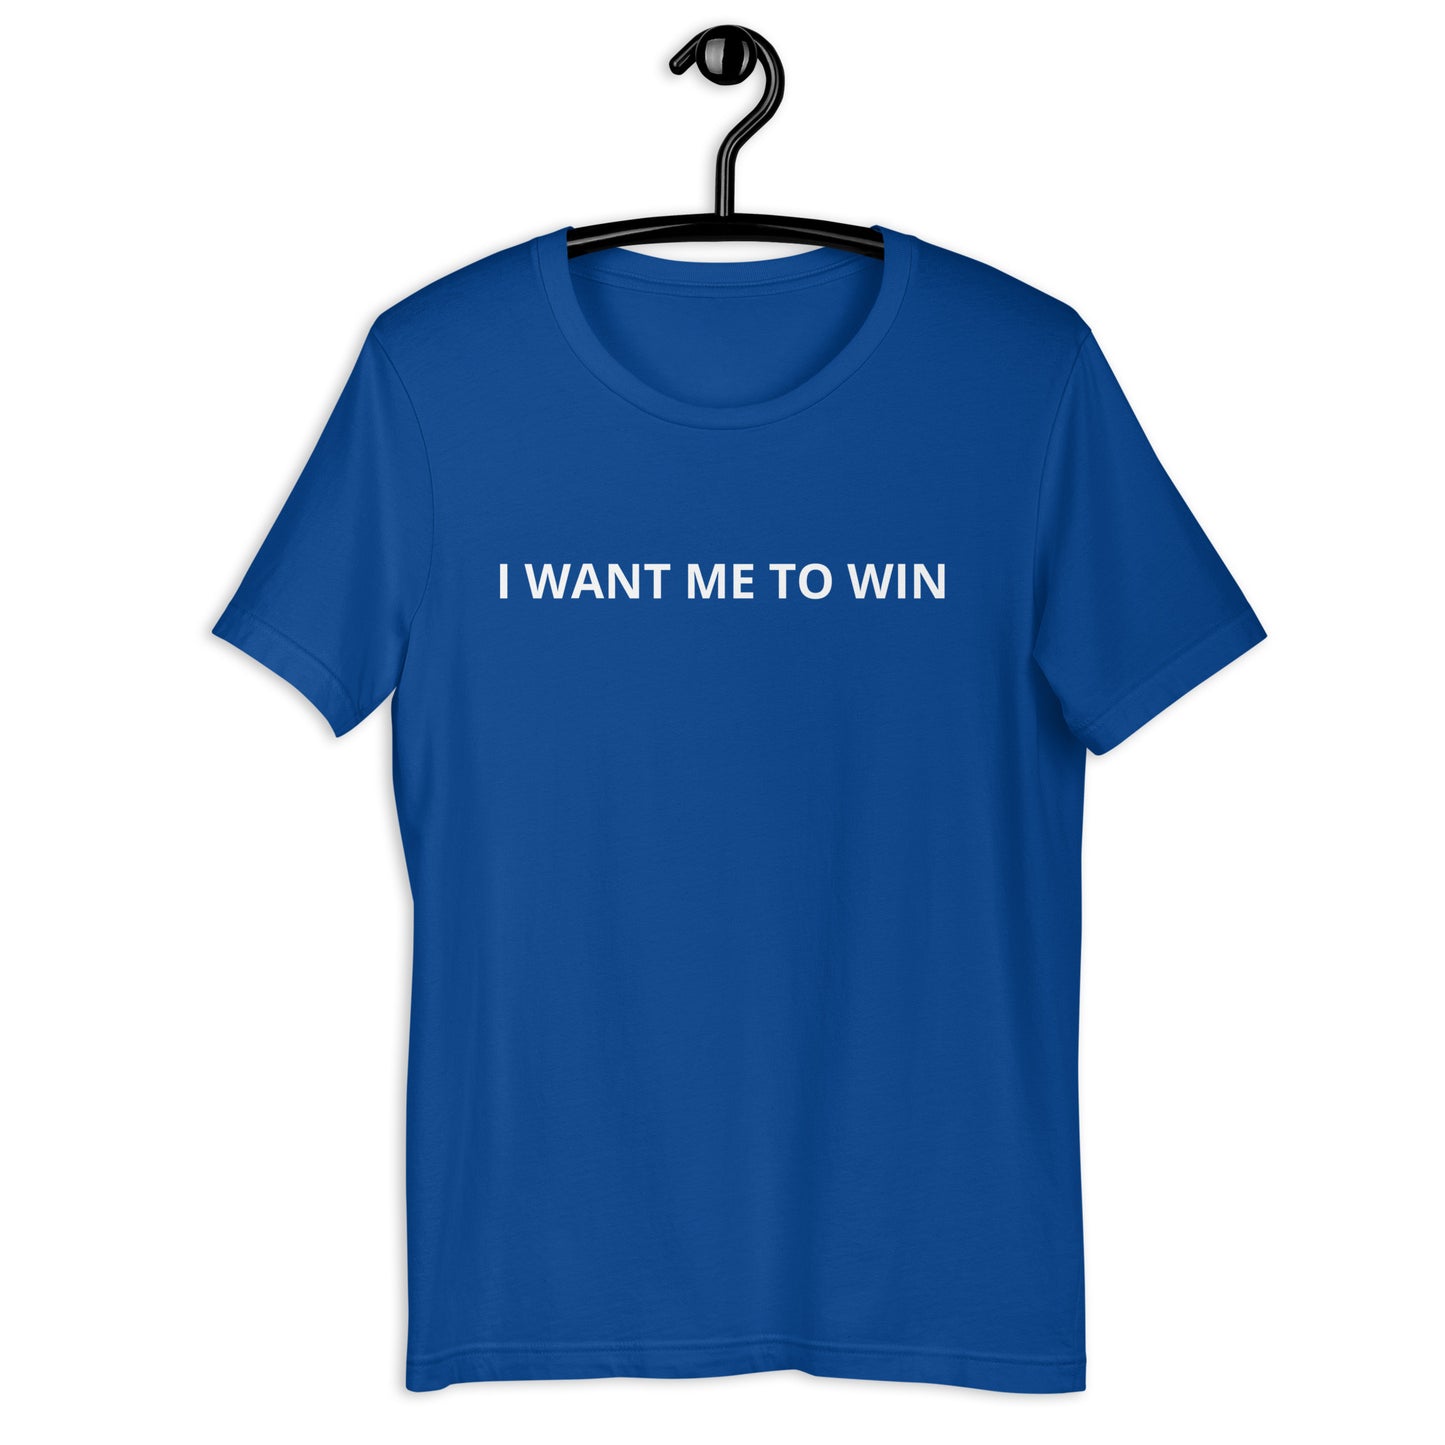 I WANT ME TO WIN  Unisex t-shirt